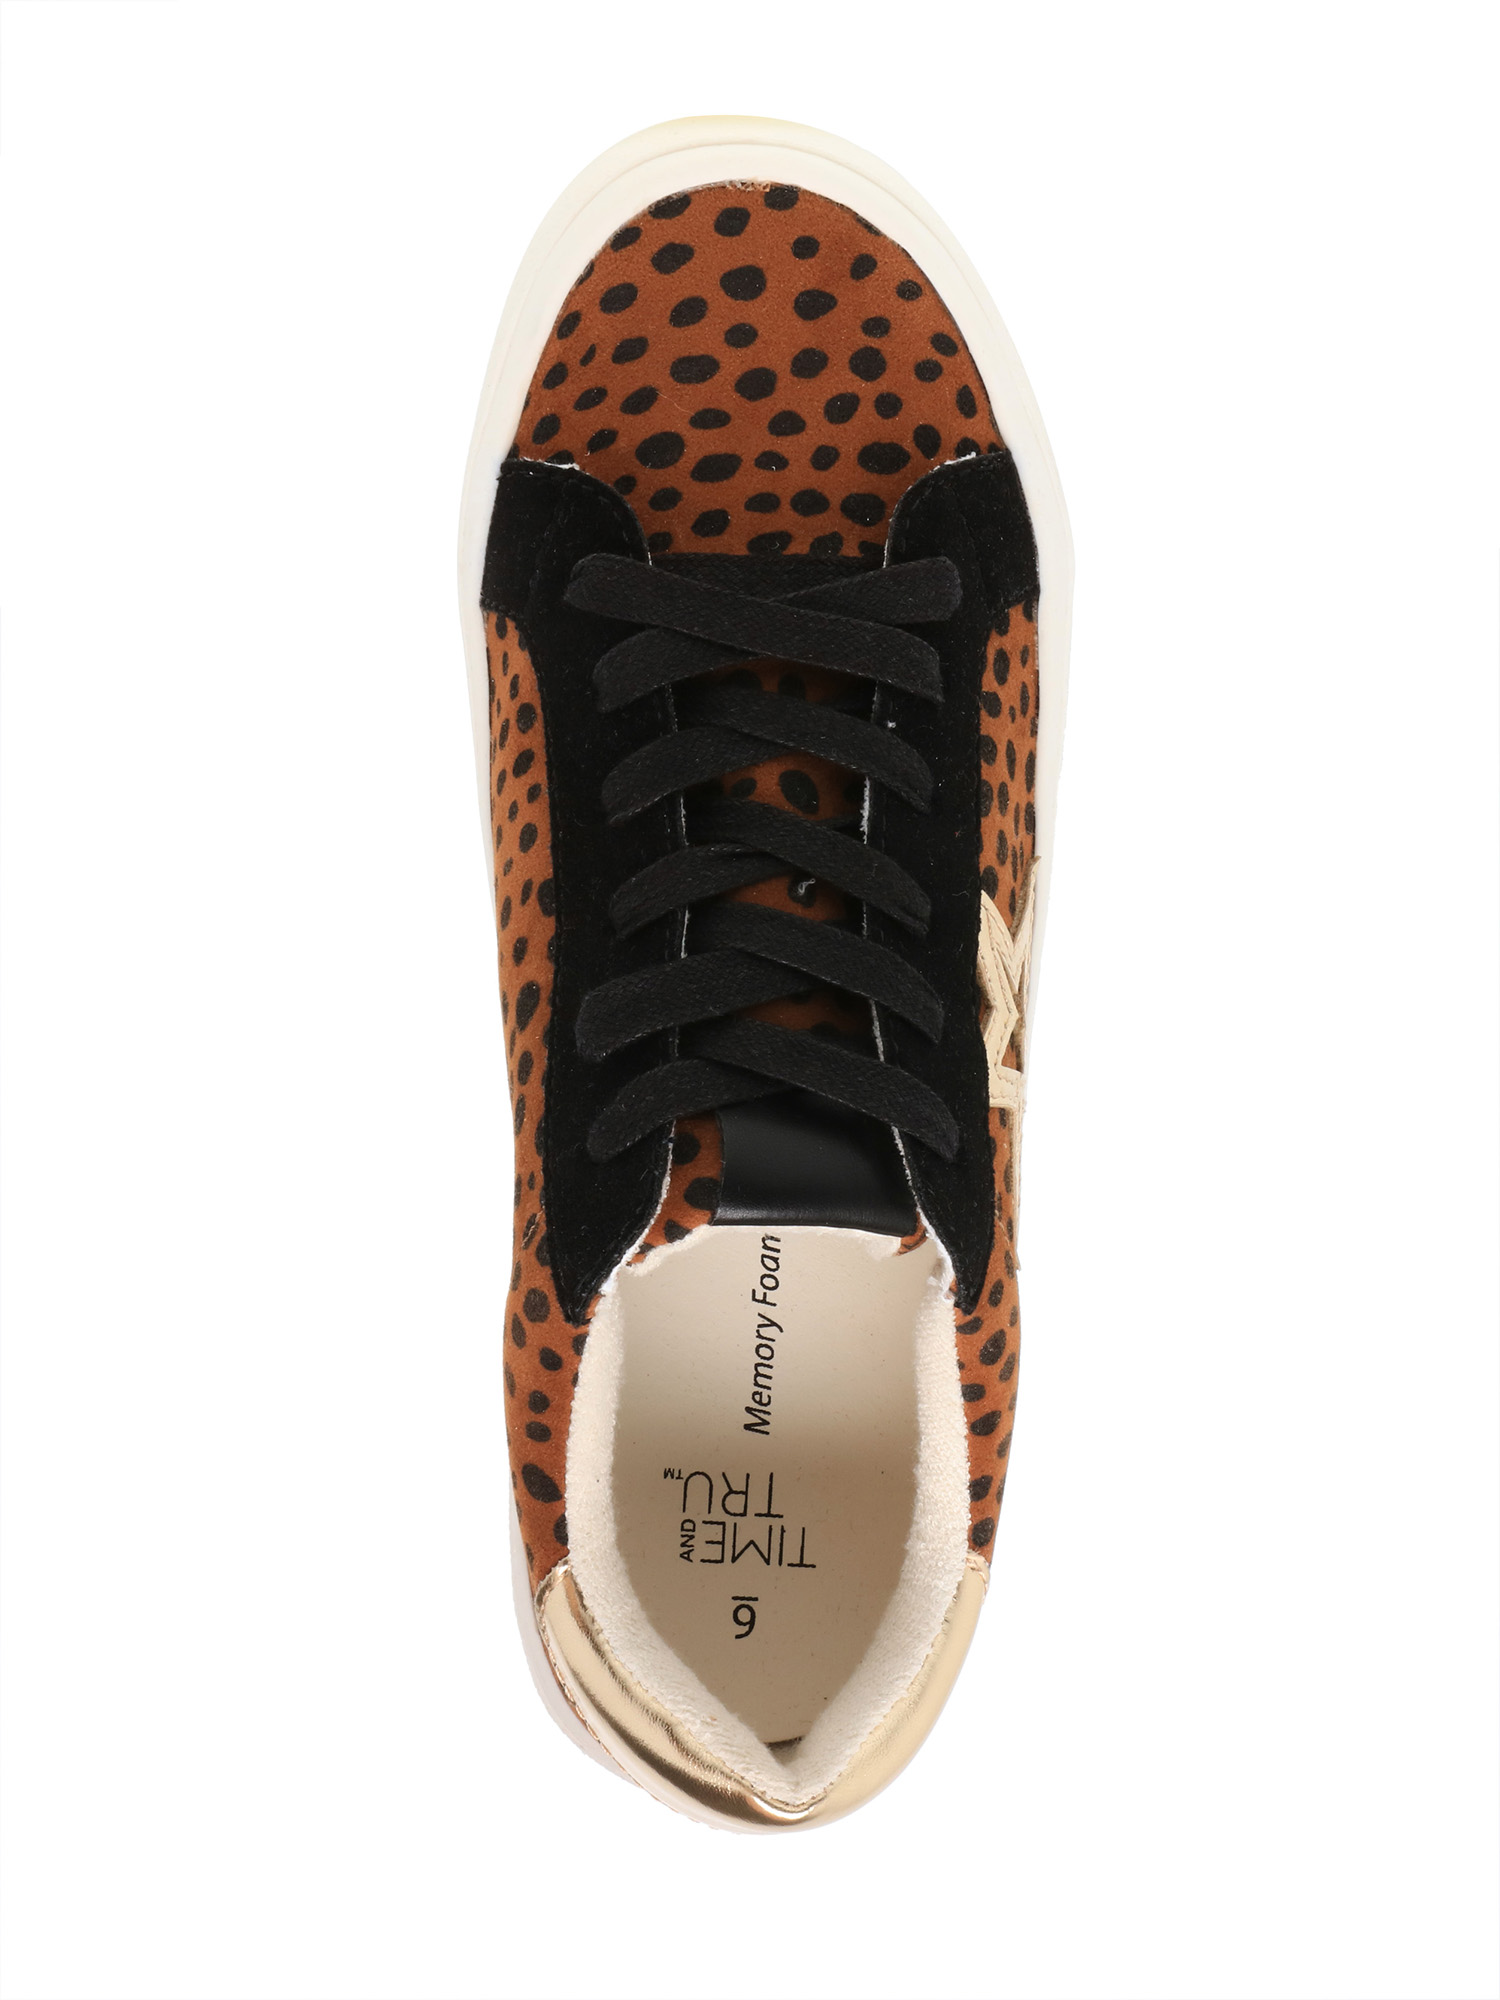 Time and Tru Women's Fashion Sneaker - image 5 of 6